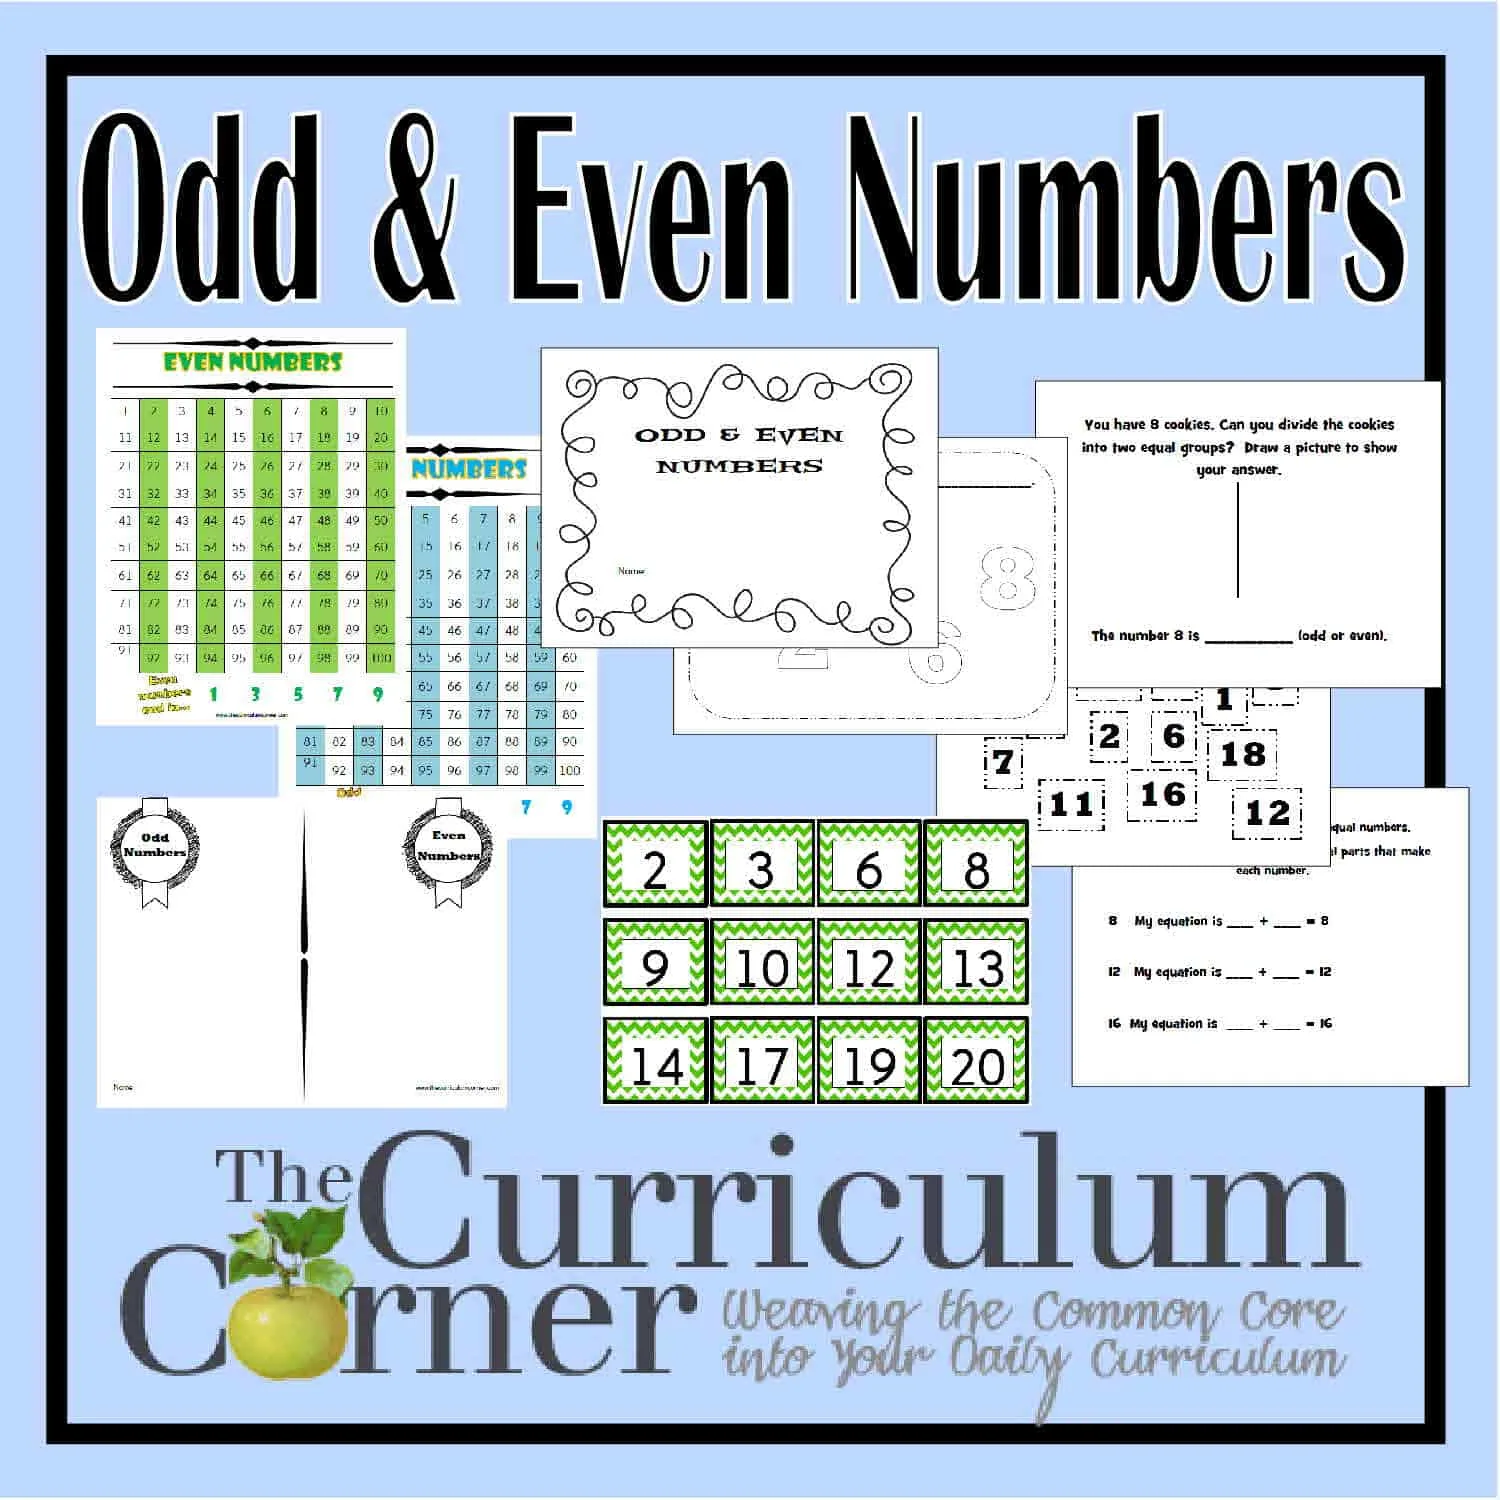 Odd and Even Numbers - practice activities free from The Curriculum Corner